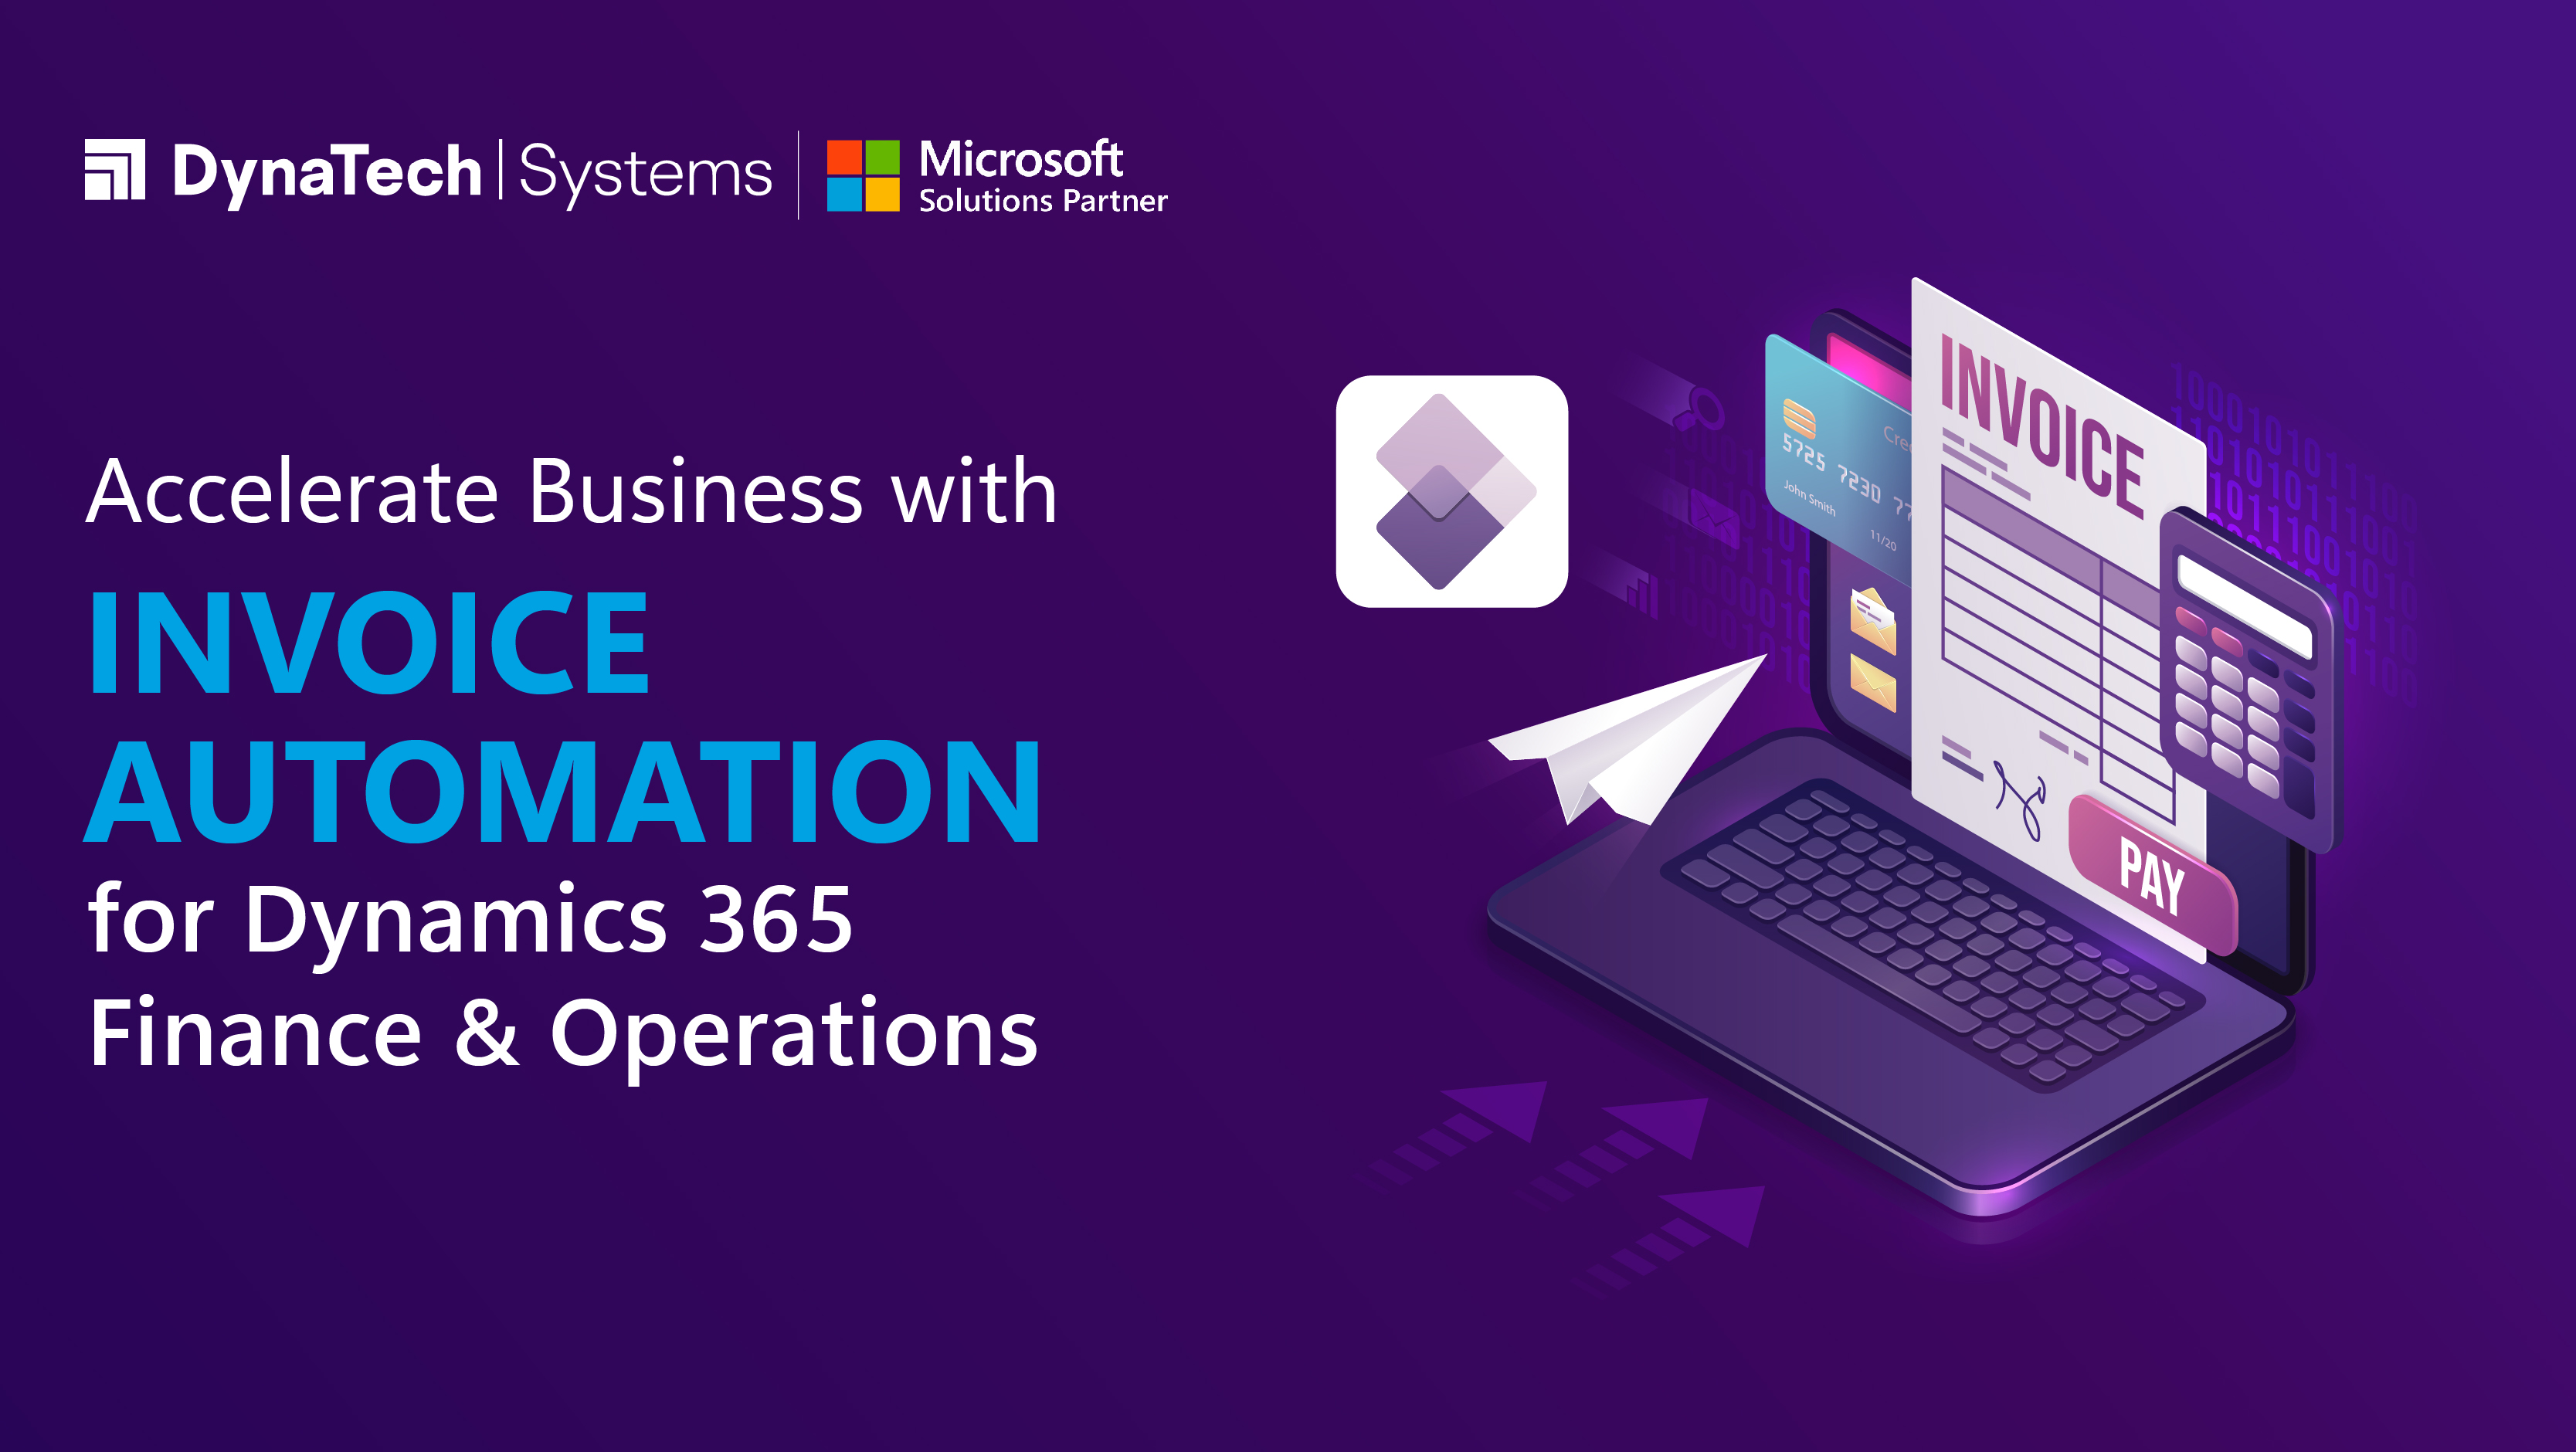 Accelerate Business with Invoice Automation for Dynamics 365 Finance & Operations